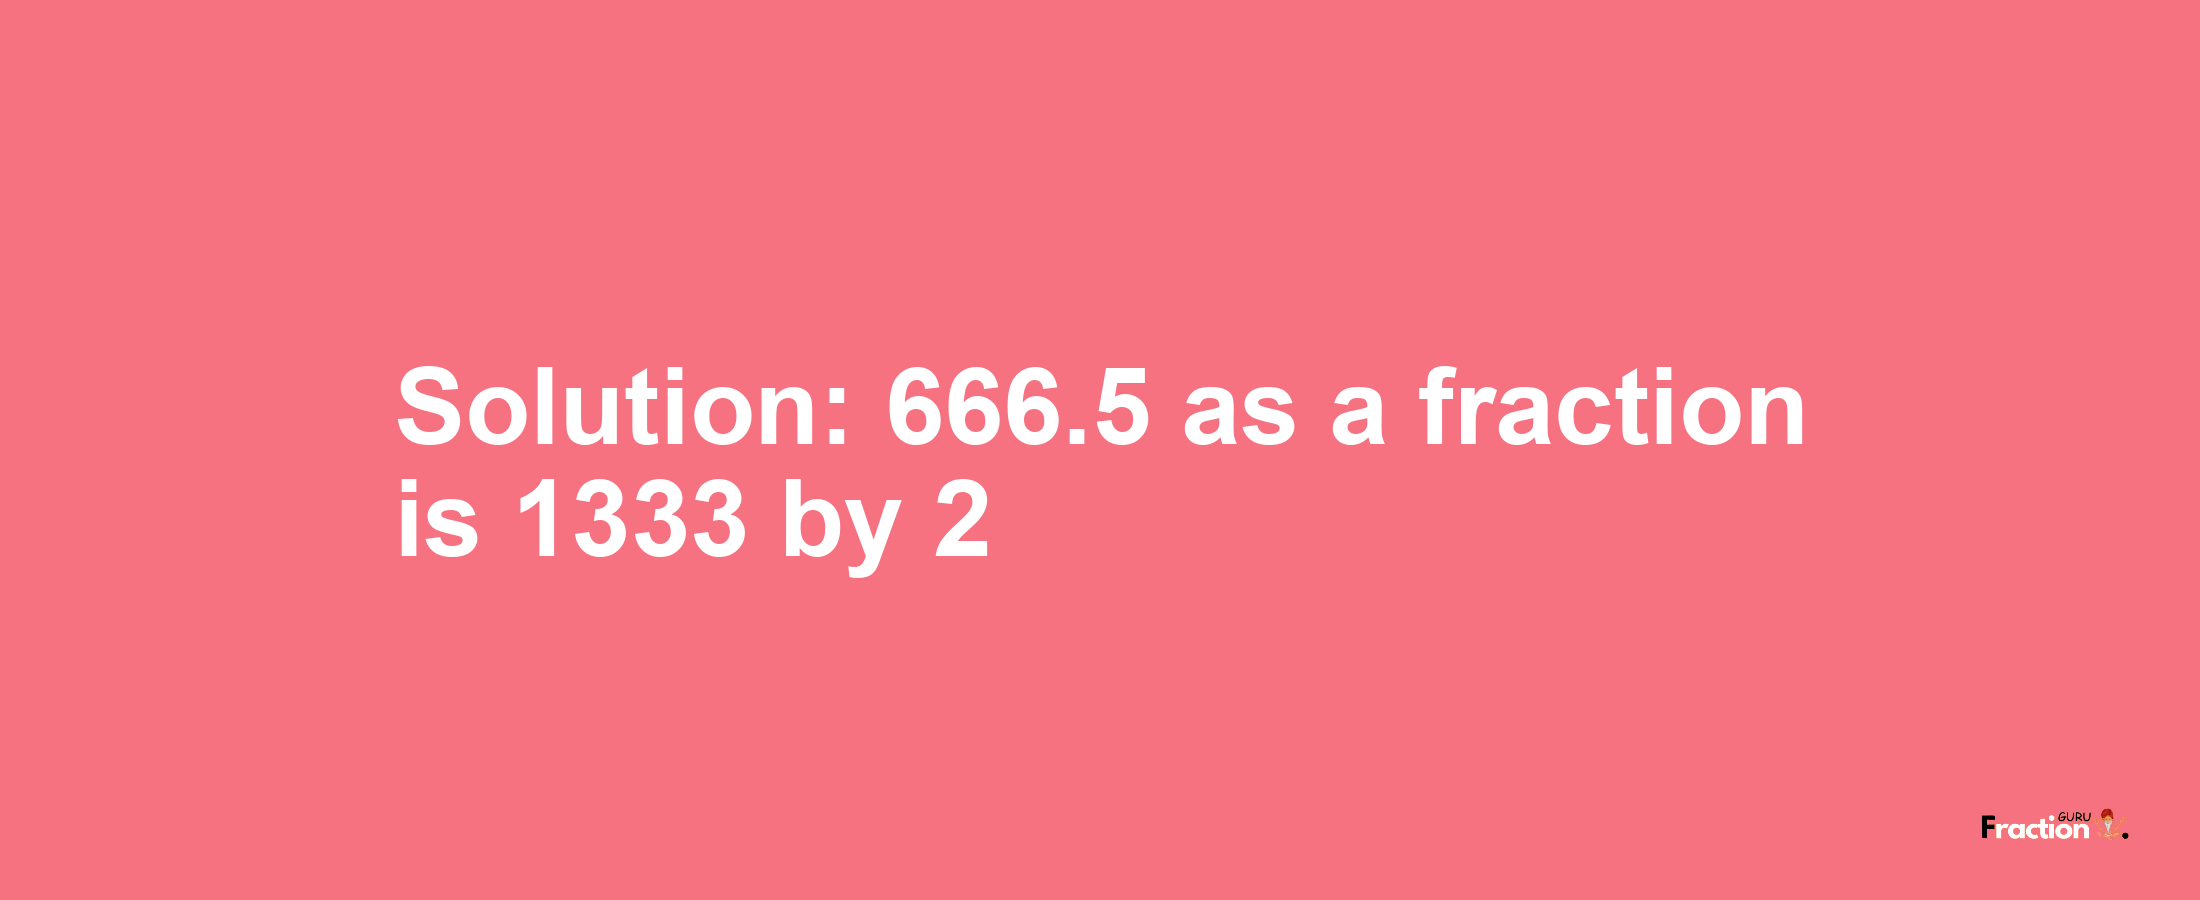 Solution:666.5 as a fraction is 1333/2